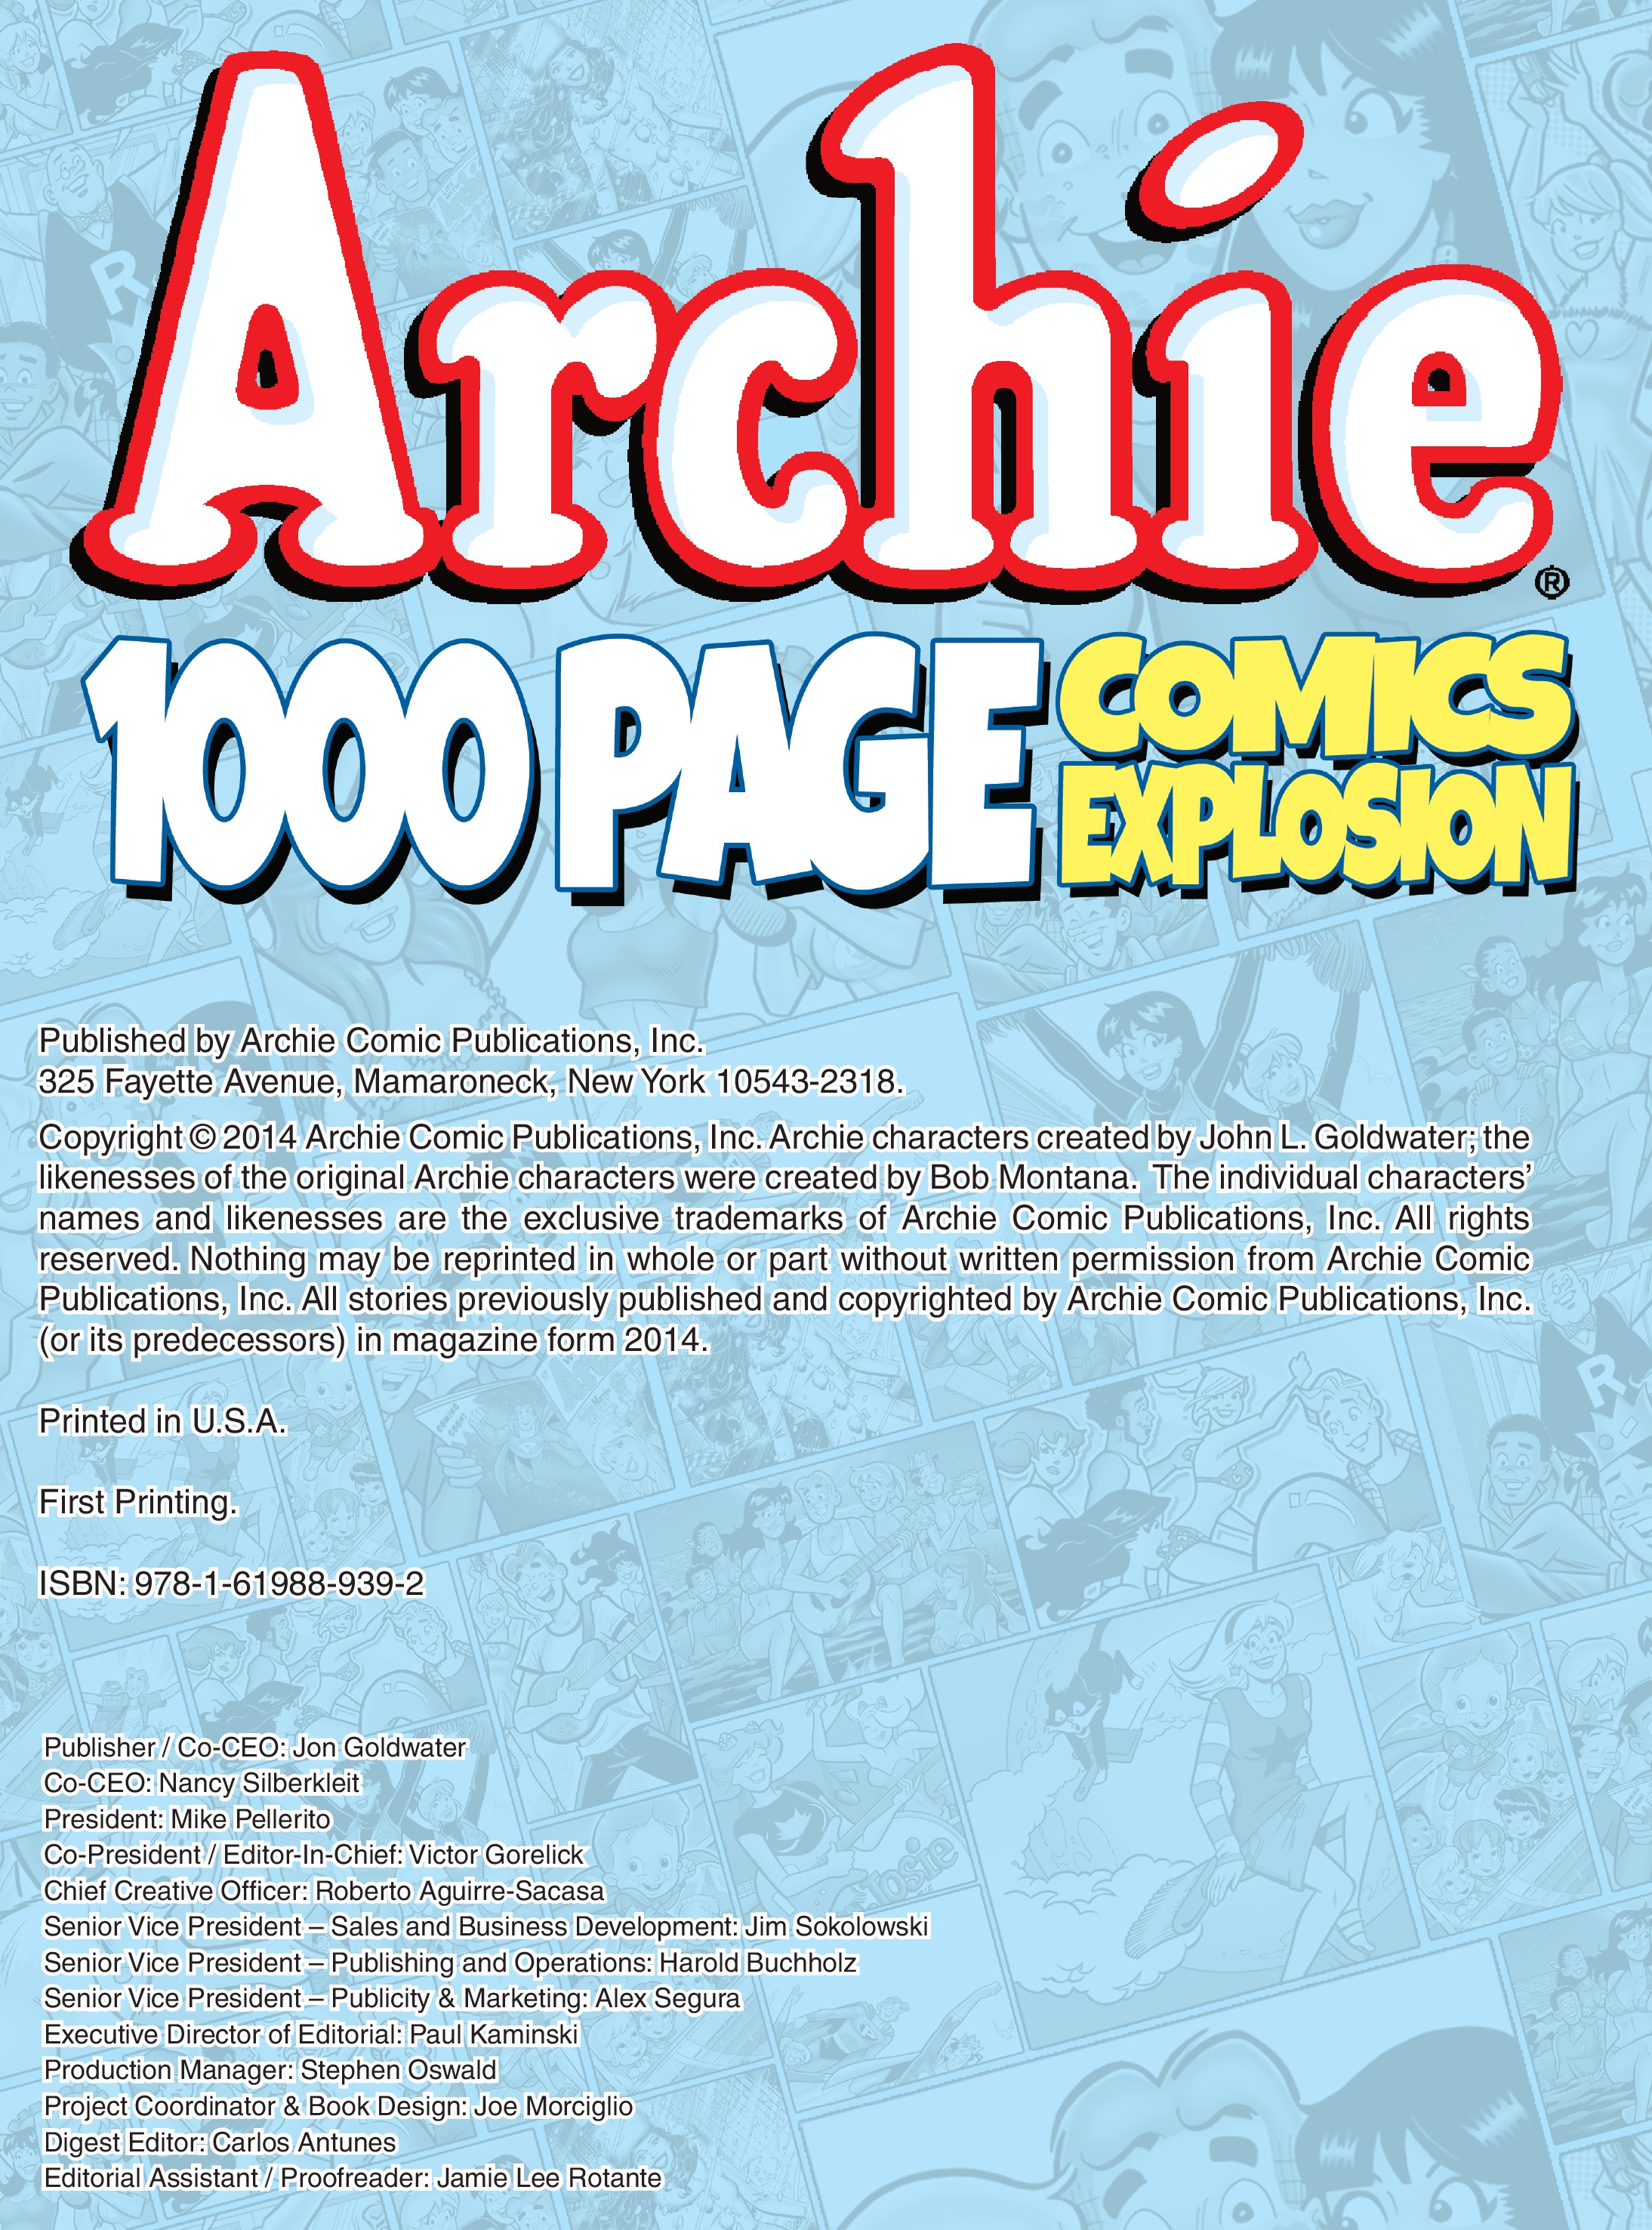 Read online Archie 1000 Page Comics Explosion comic -  Issue # TPB (Part 1) - 2